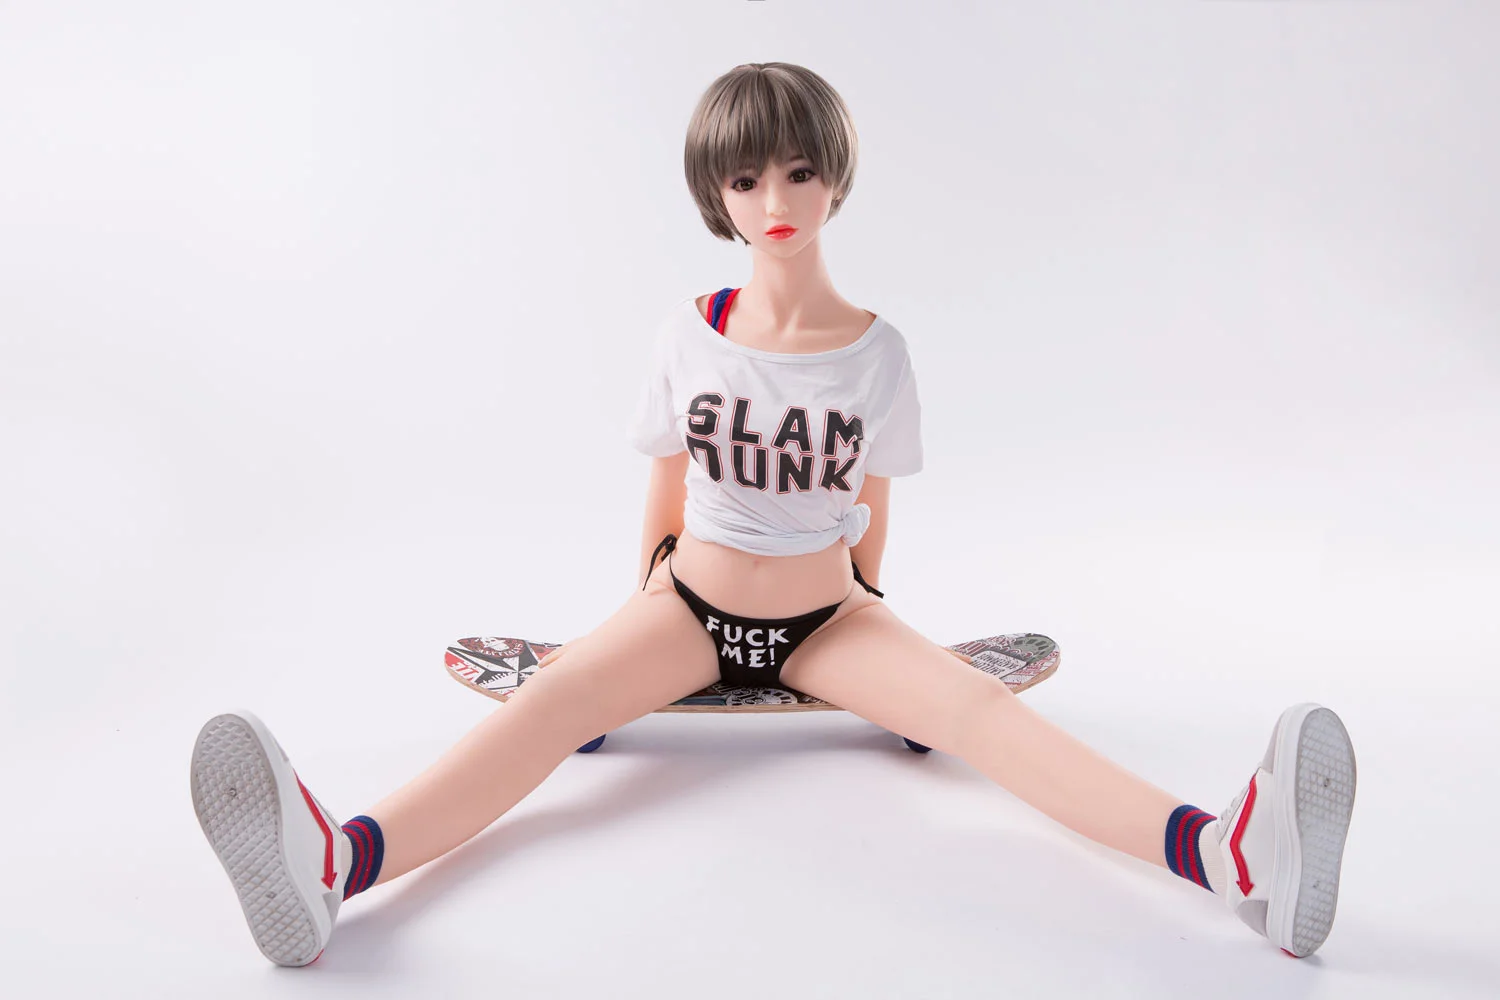 Mini sex doll sitting on a skateboard with open legs